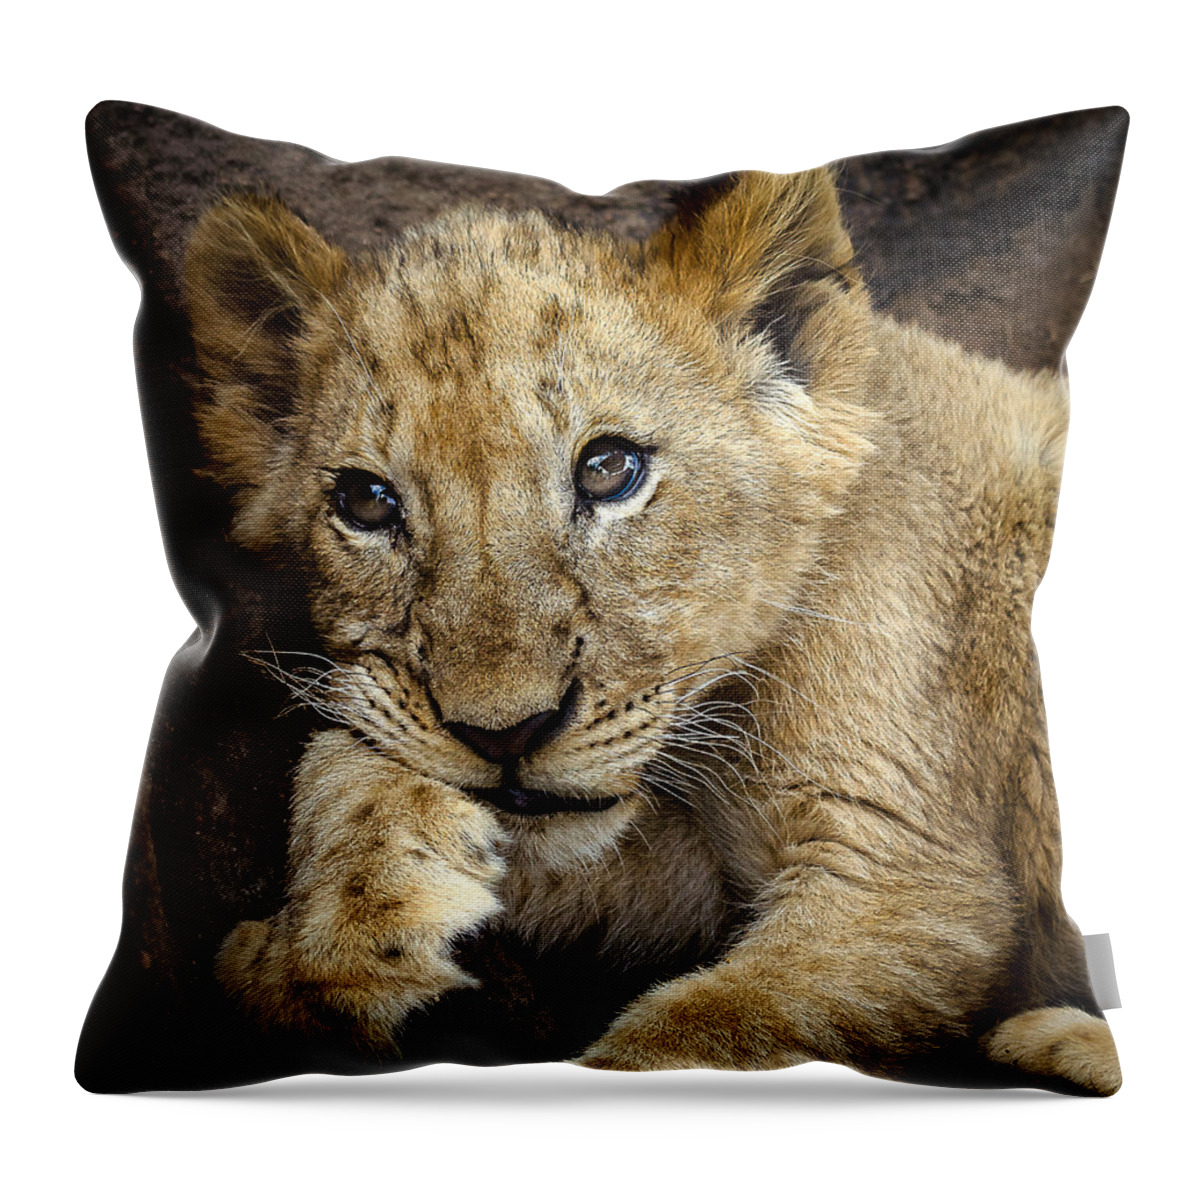 Lion Throw Pillow featuring the photograph Sleepy Lion Cub by Linda Villers